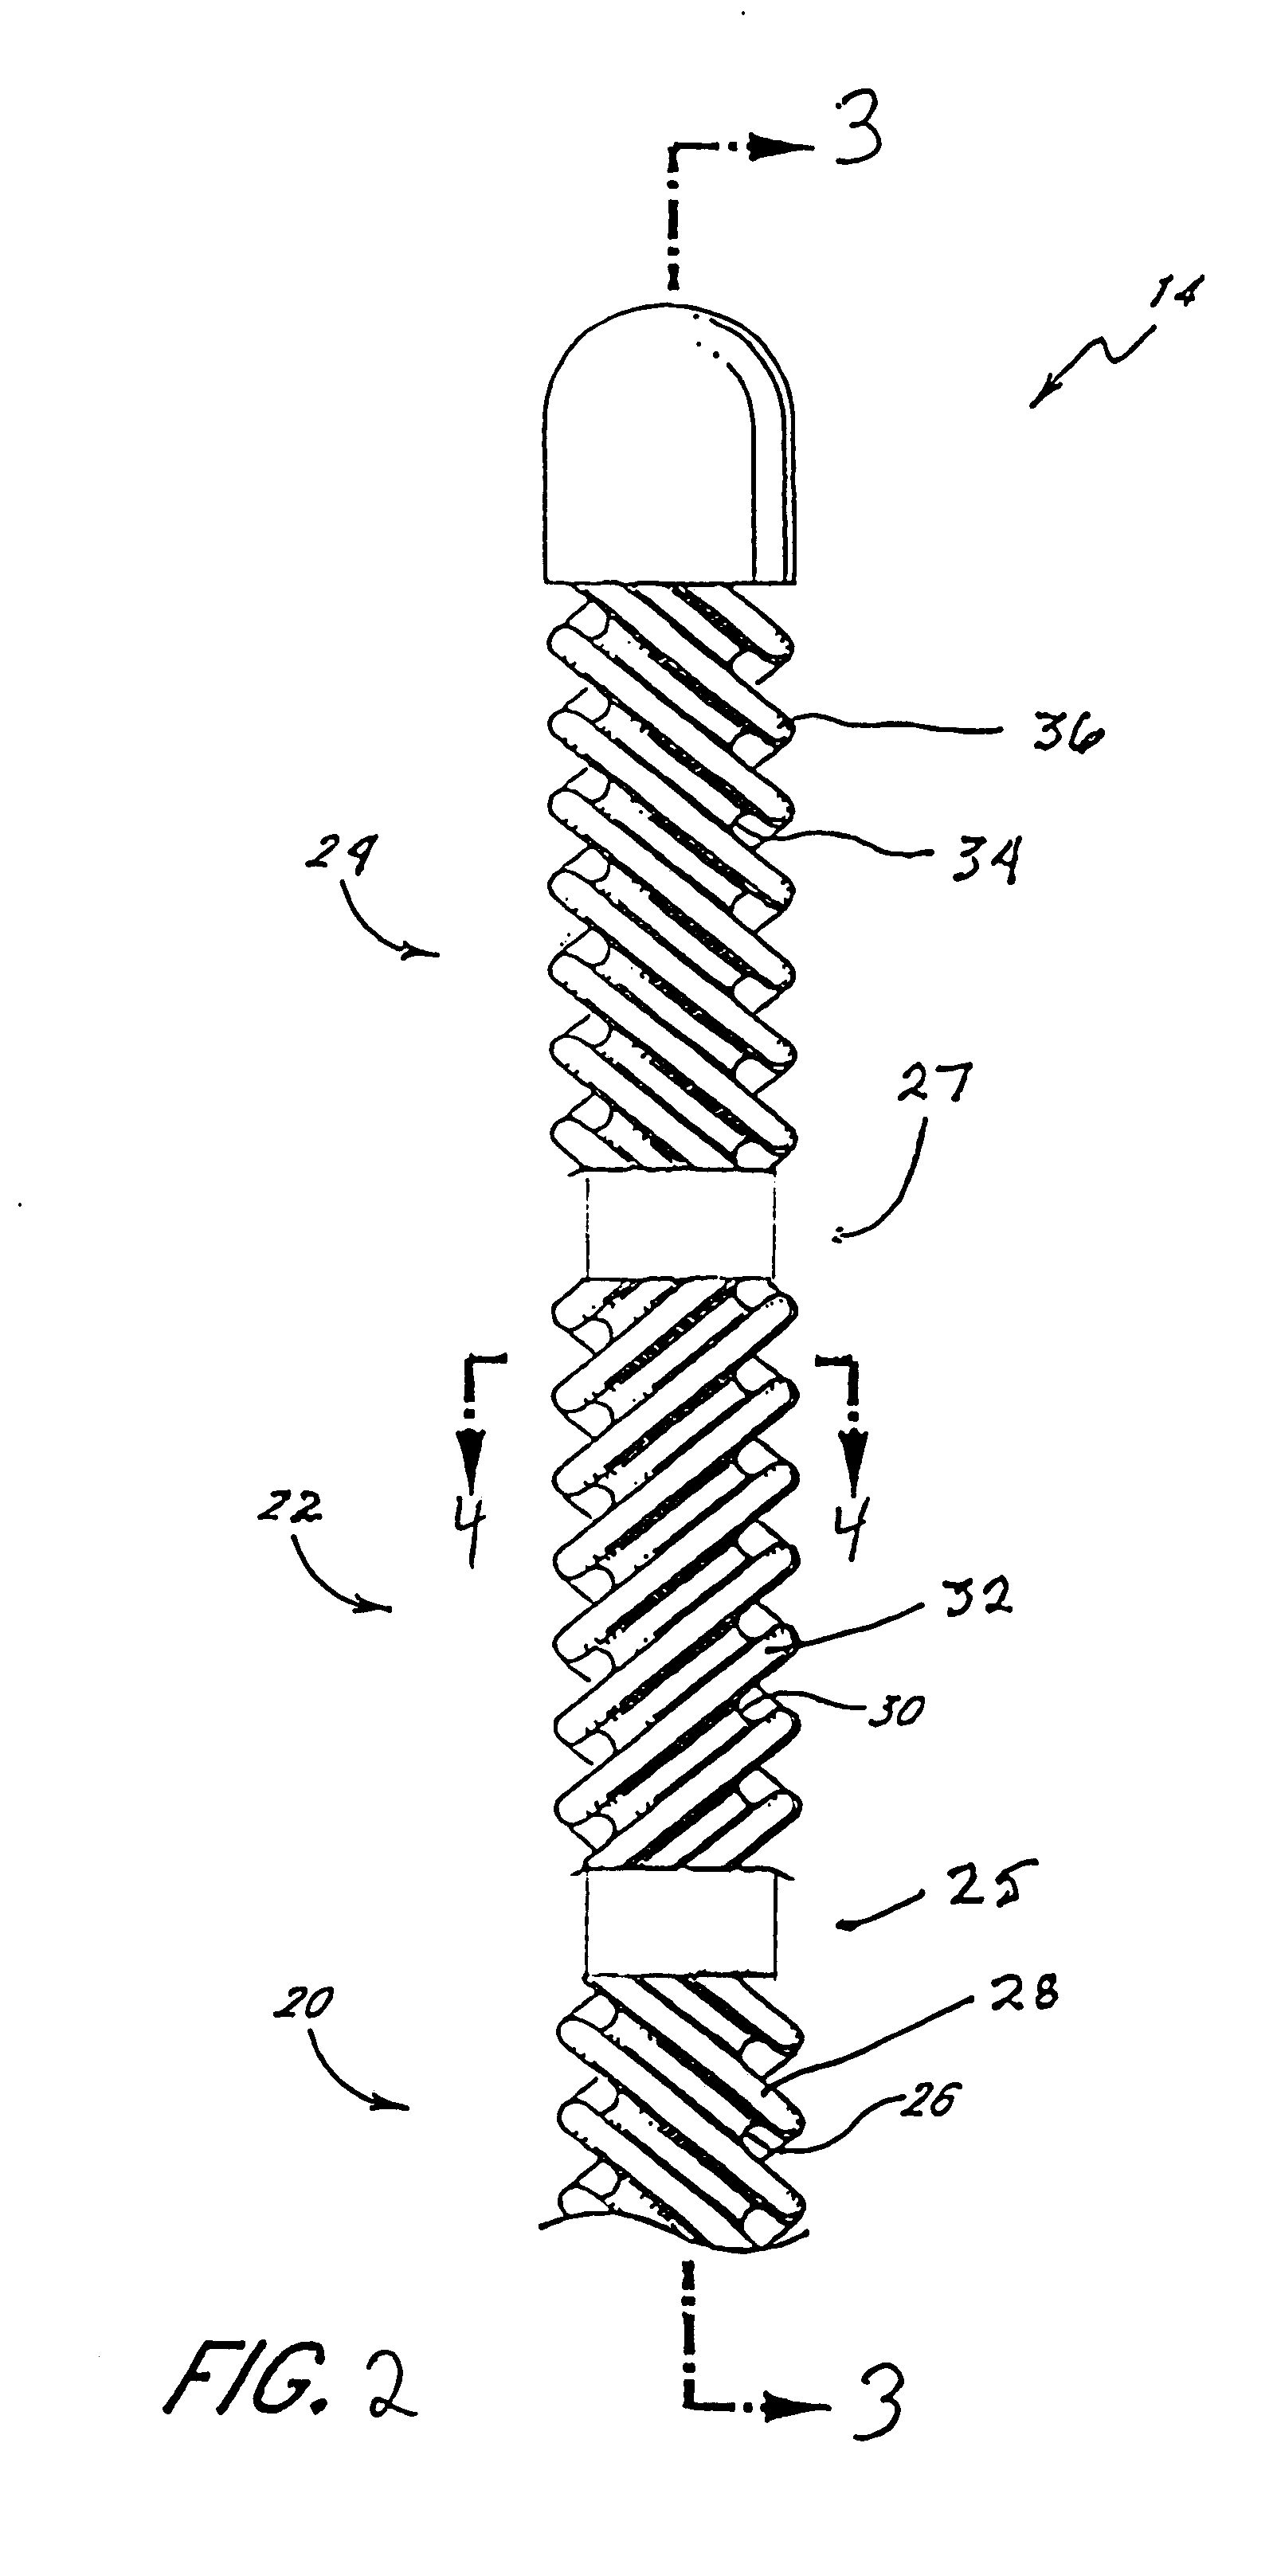 Articulation device for selective organ cooling apparatus